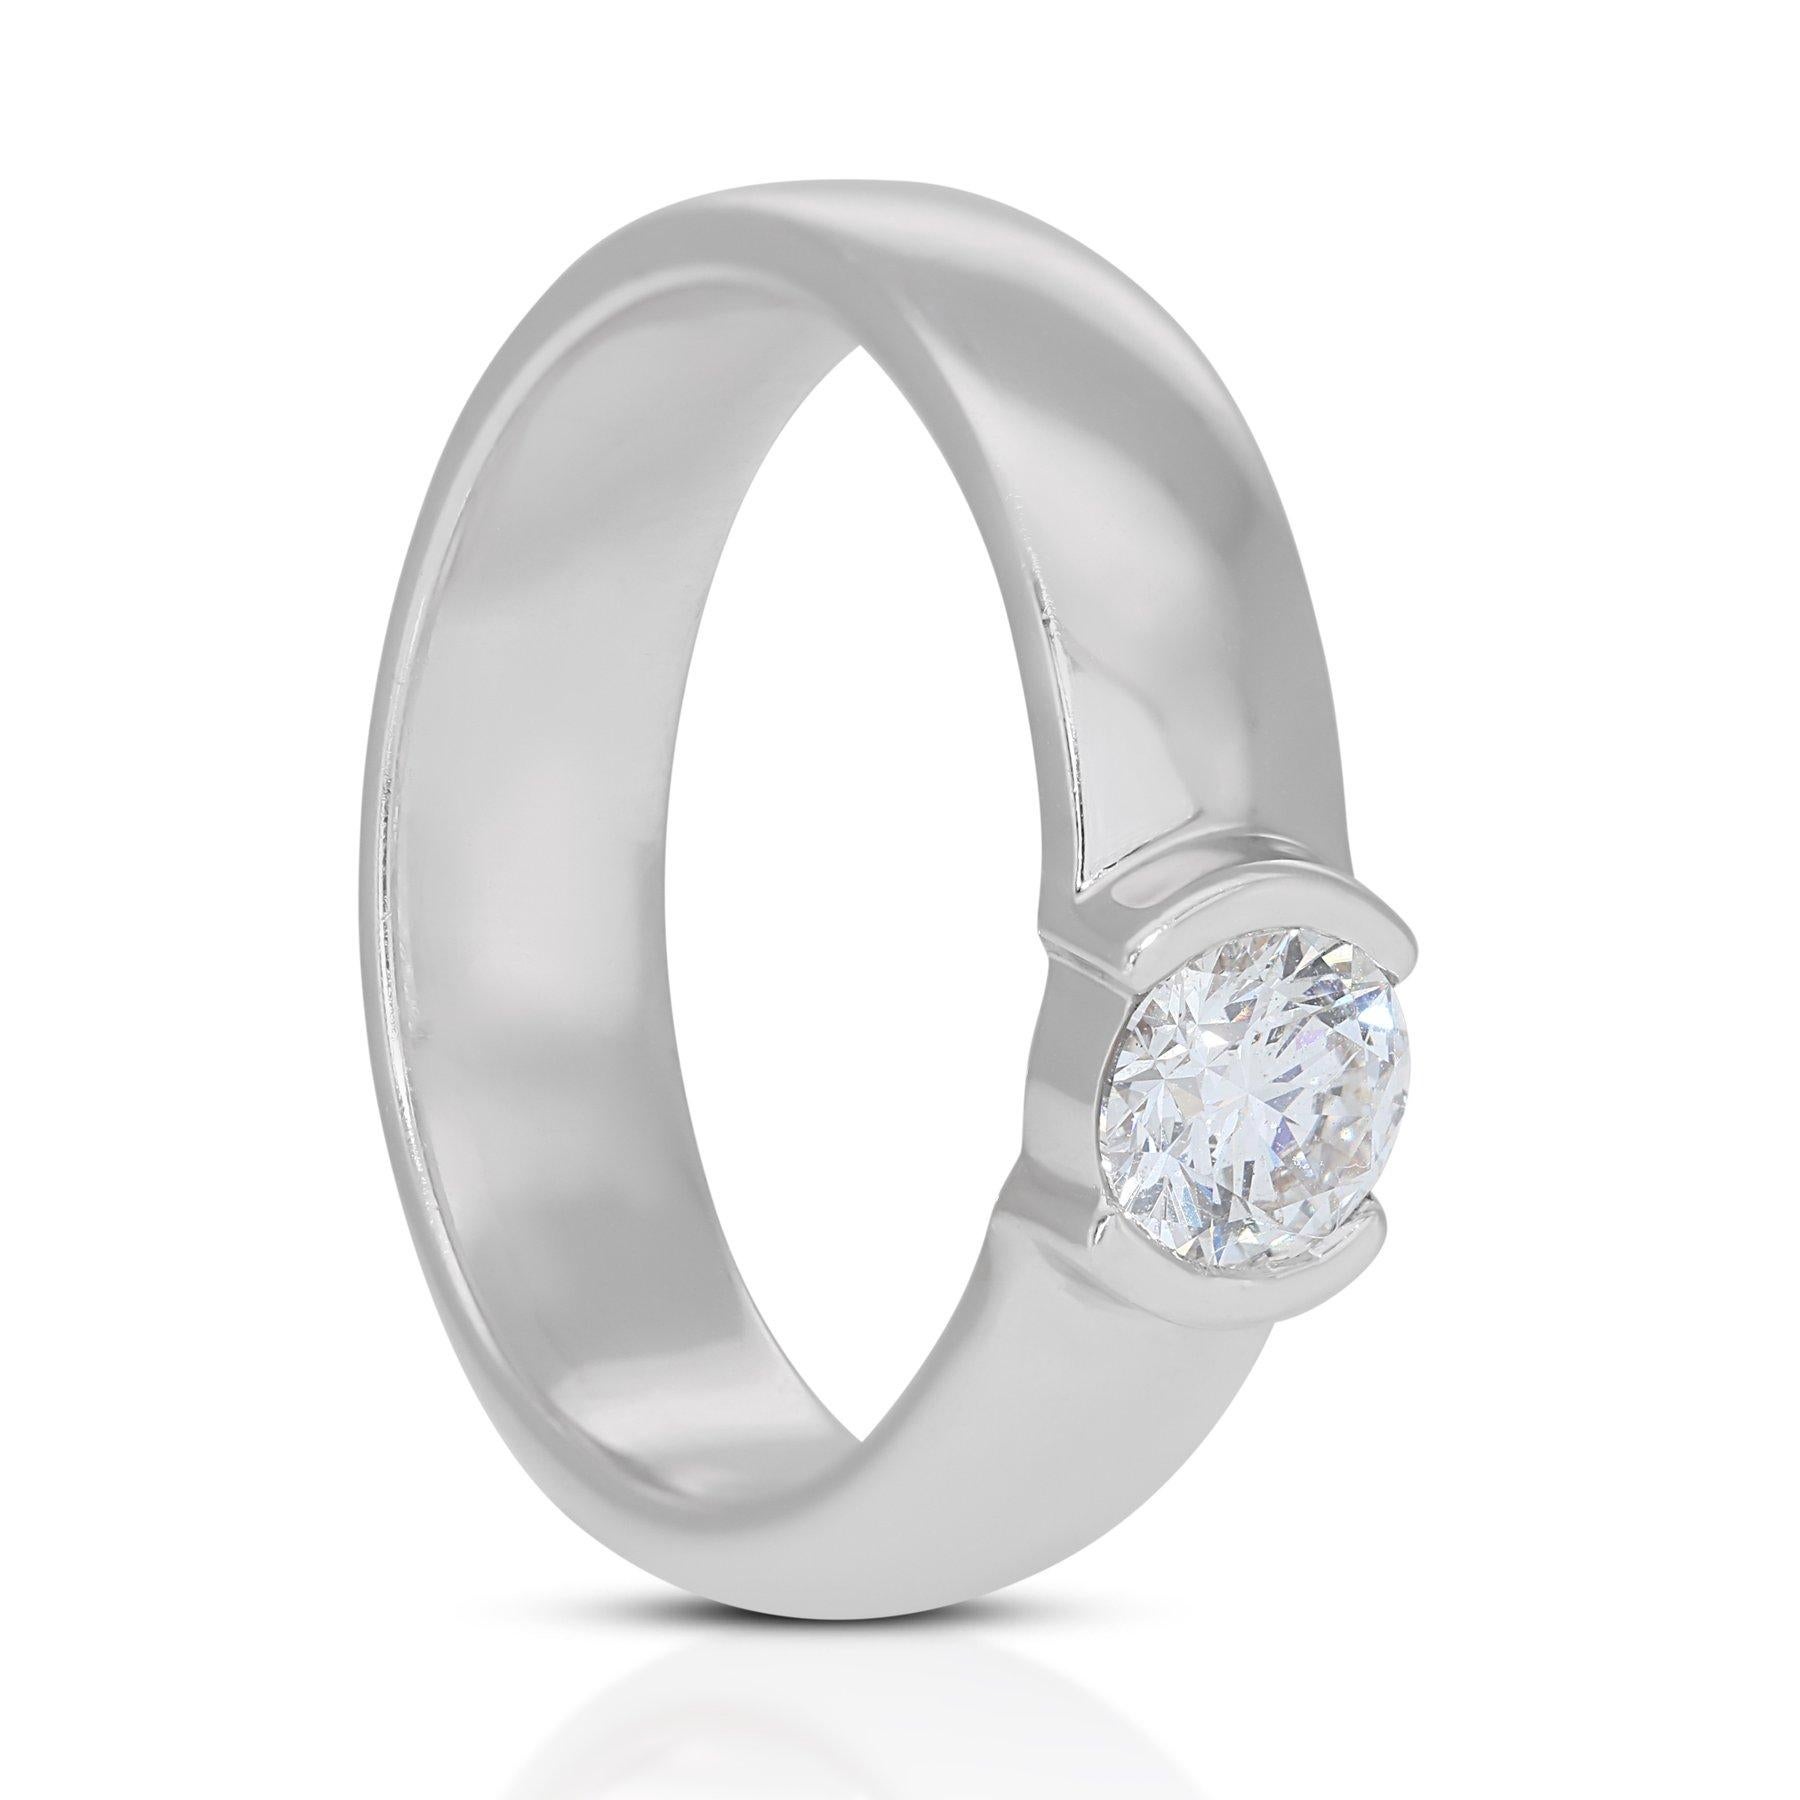 Round Cut Sophisticated 0.70ct Diamond Solitaire Ring in 18k White Gold - GIA Certified For Sale